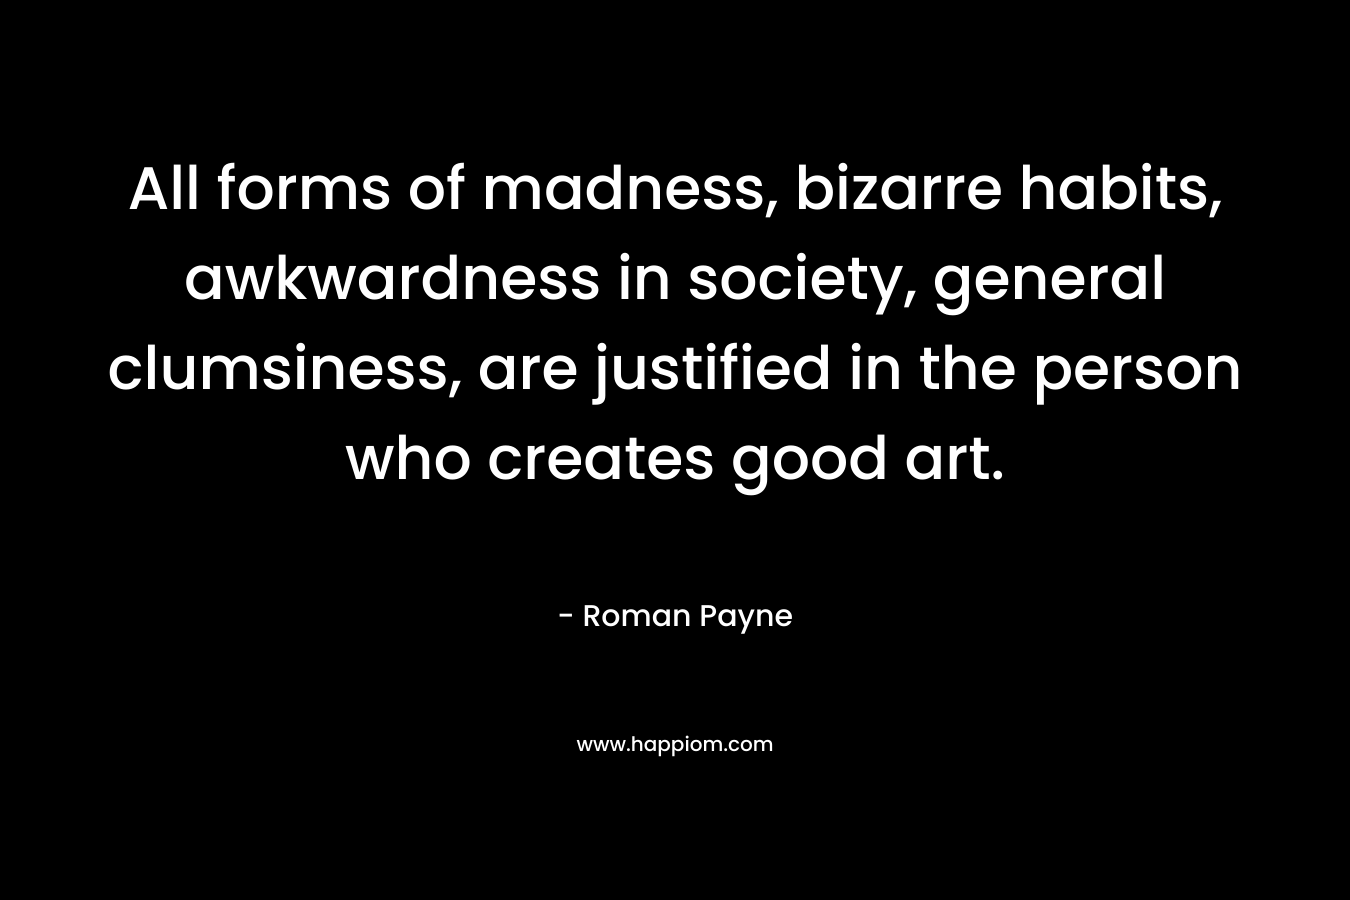 All forms of madness, bizarre habits, awkwardness in society, general clumsiness, are justified in the person who creates good art.